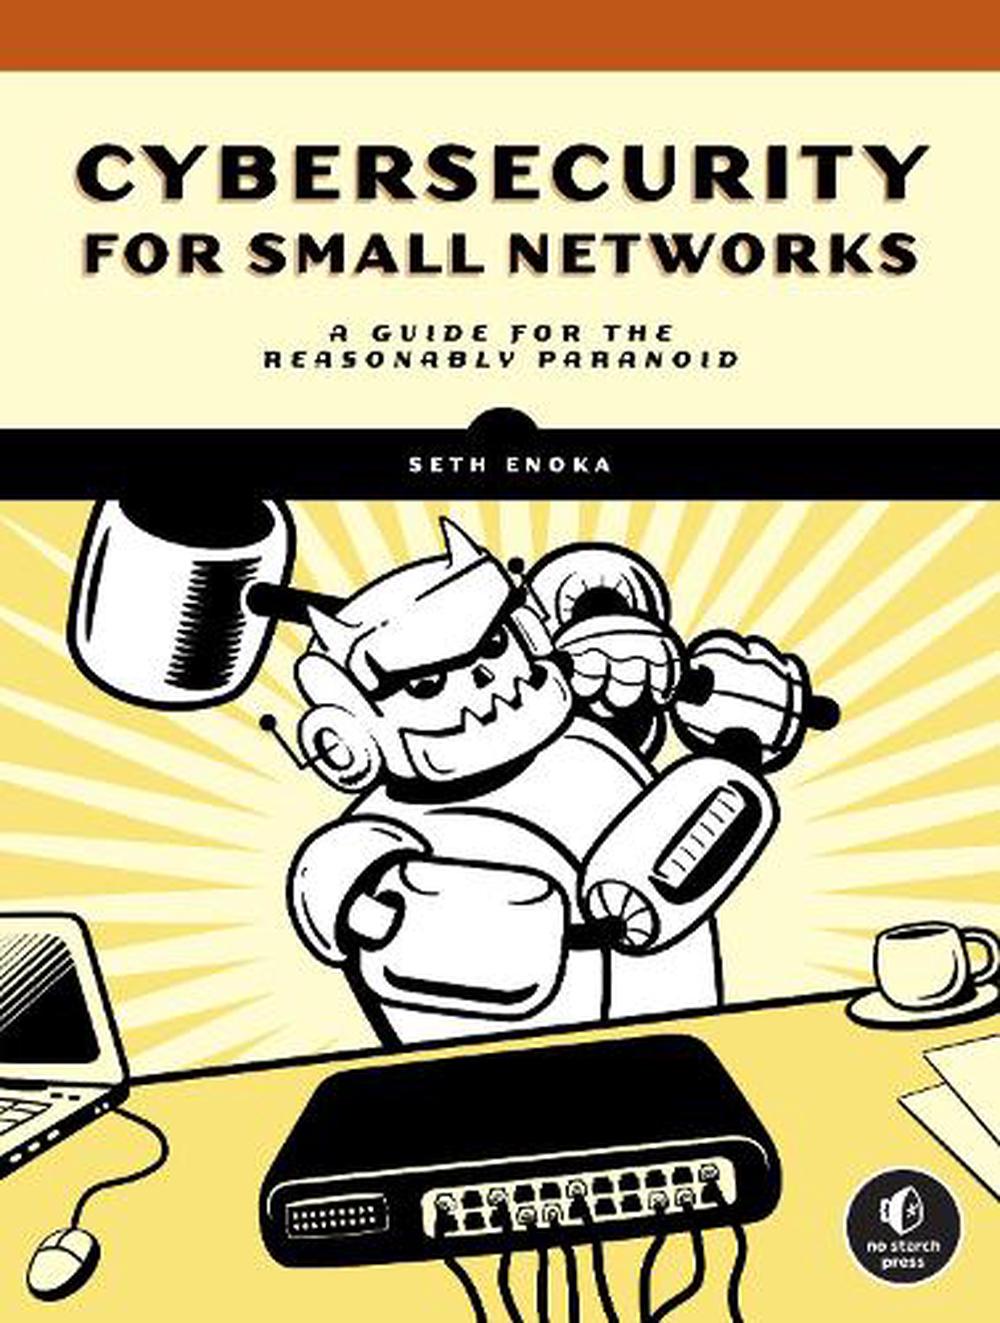 Cybersecurity for Small Networks: A No-Nonsense Guide for the Reasonably Paranoi - Photo 1/1